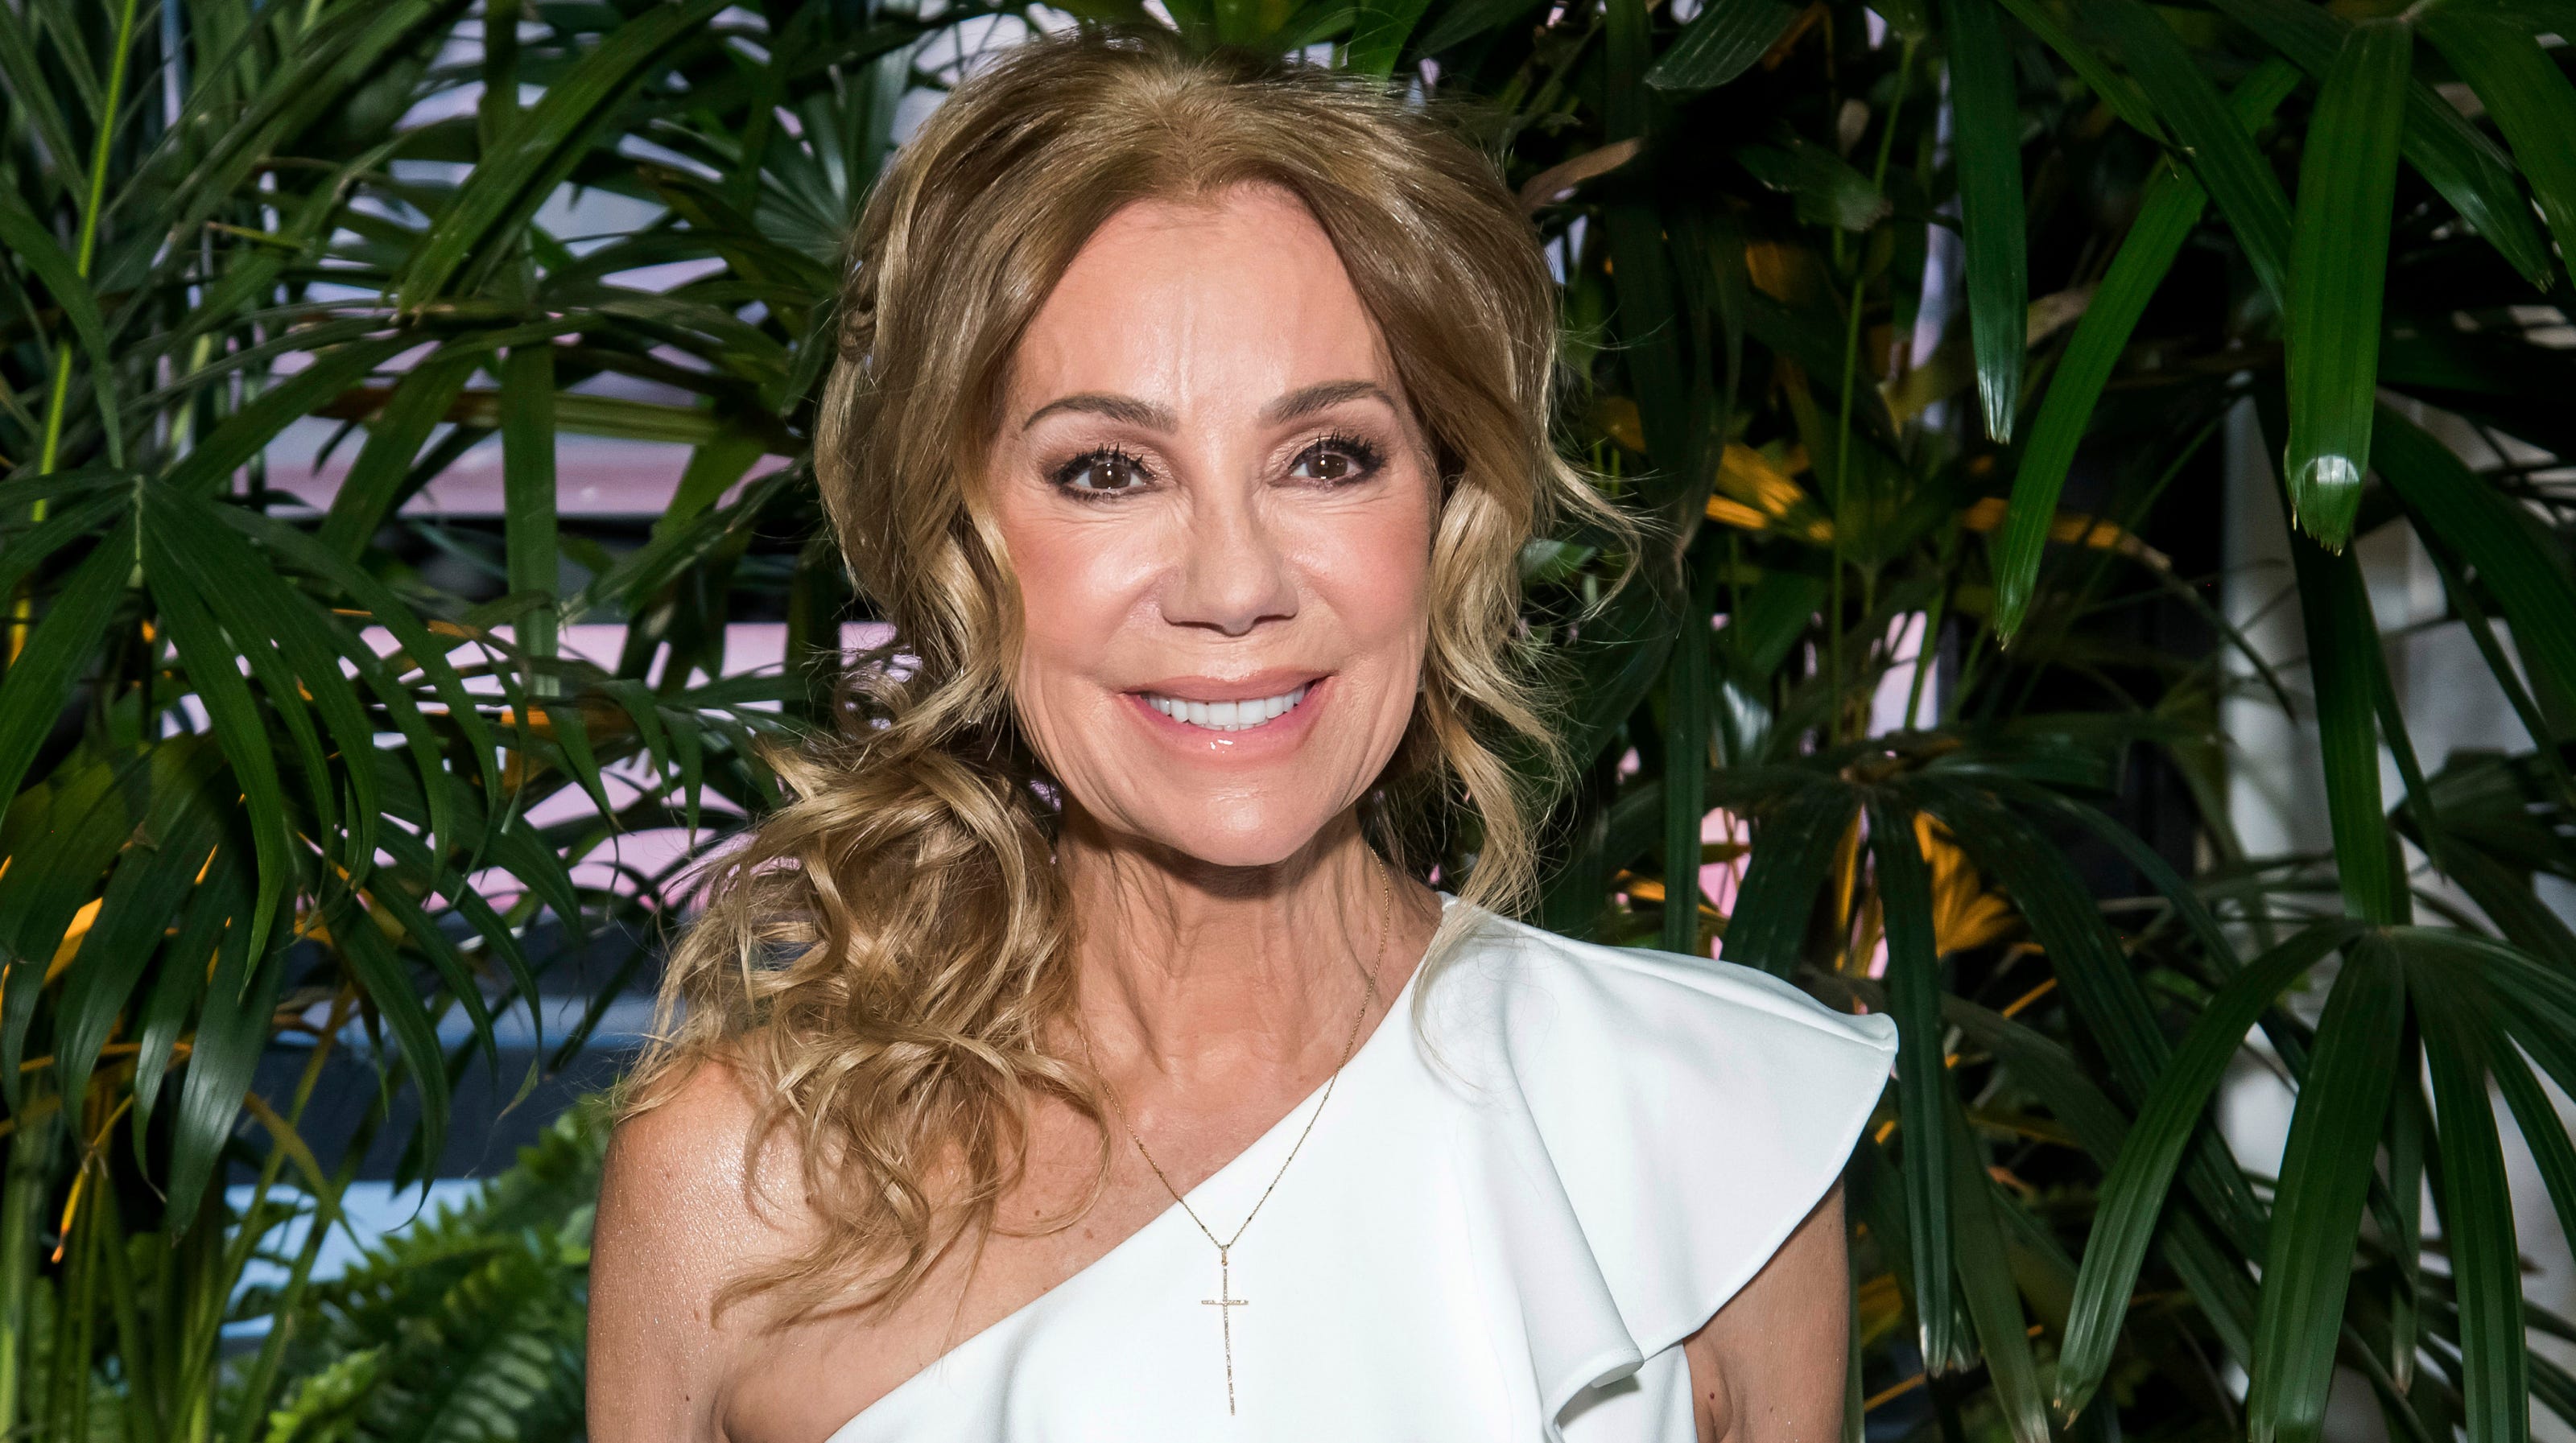 Today' exit by Kathie Lee Gifford won't make her 'bawl like a baby'